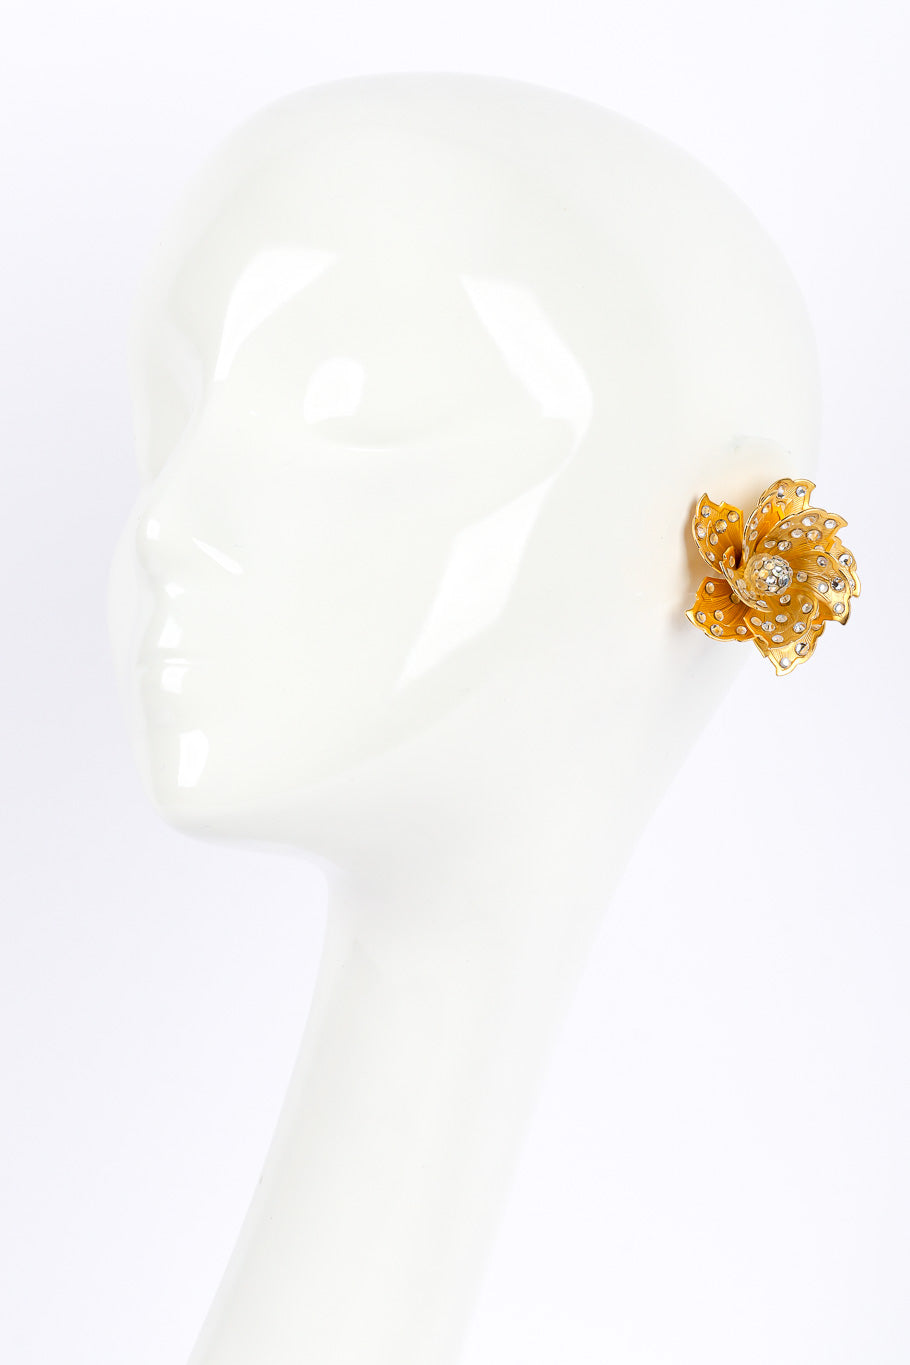 Sculpted flower earrings by James Arpad on white background on mannequin @recessla